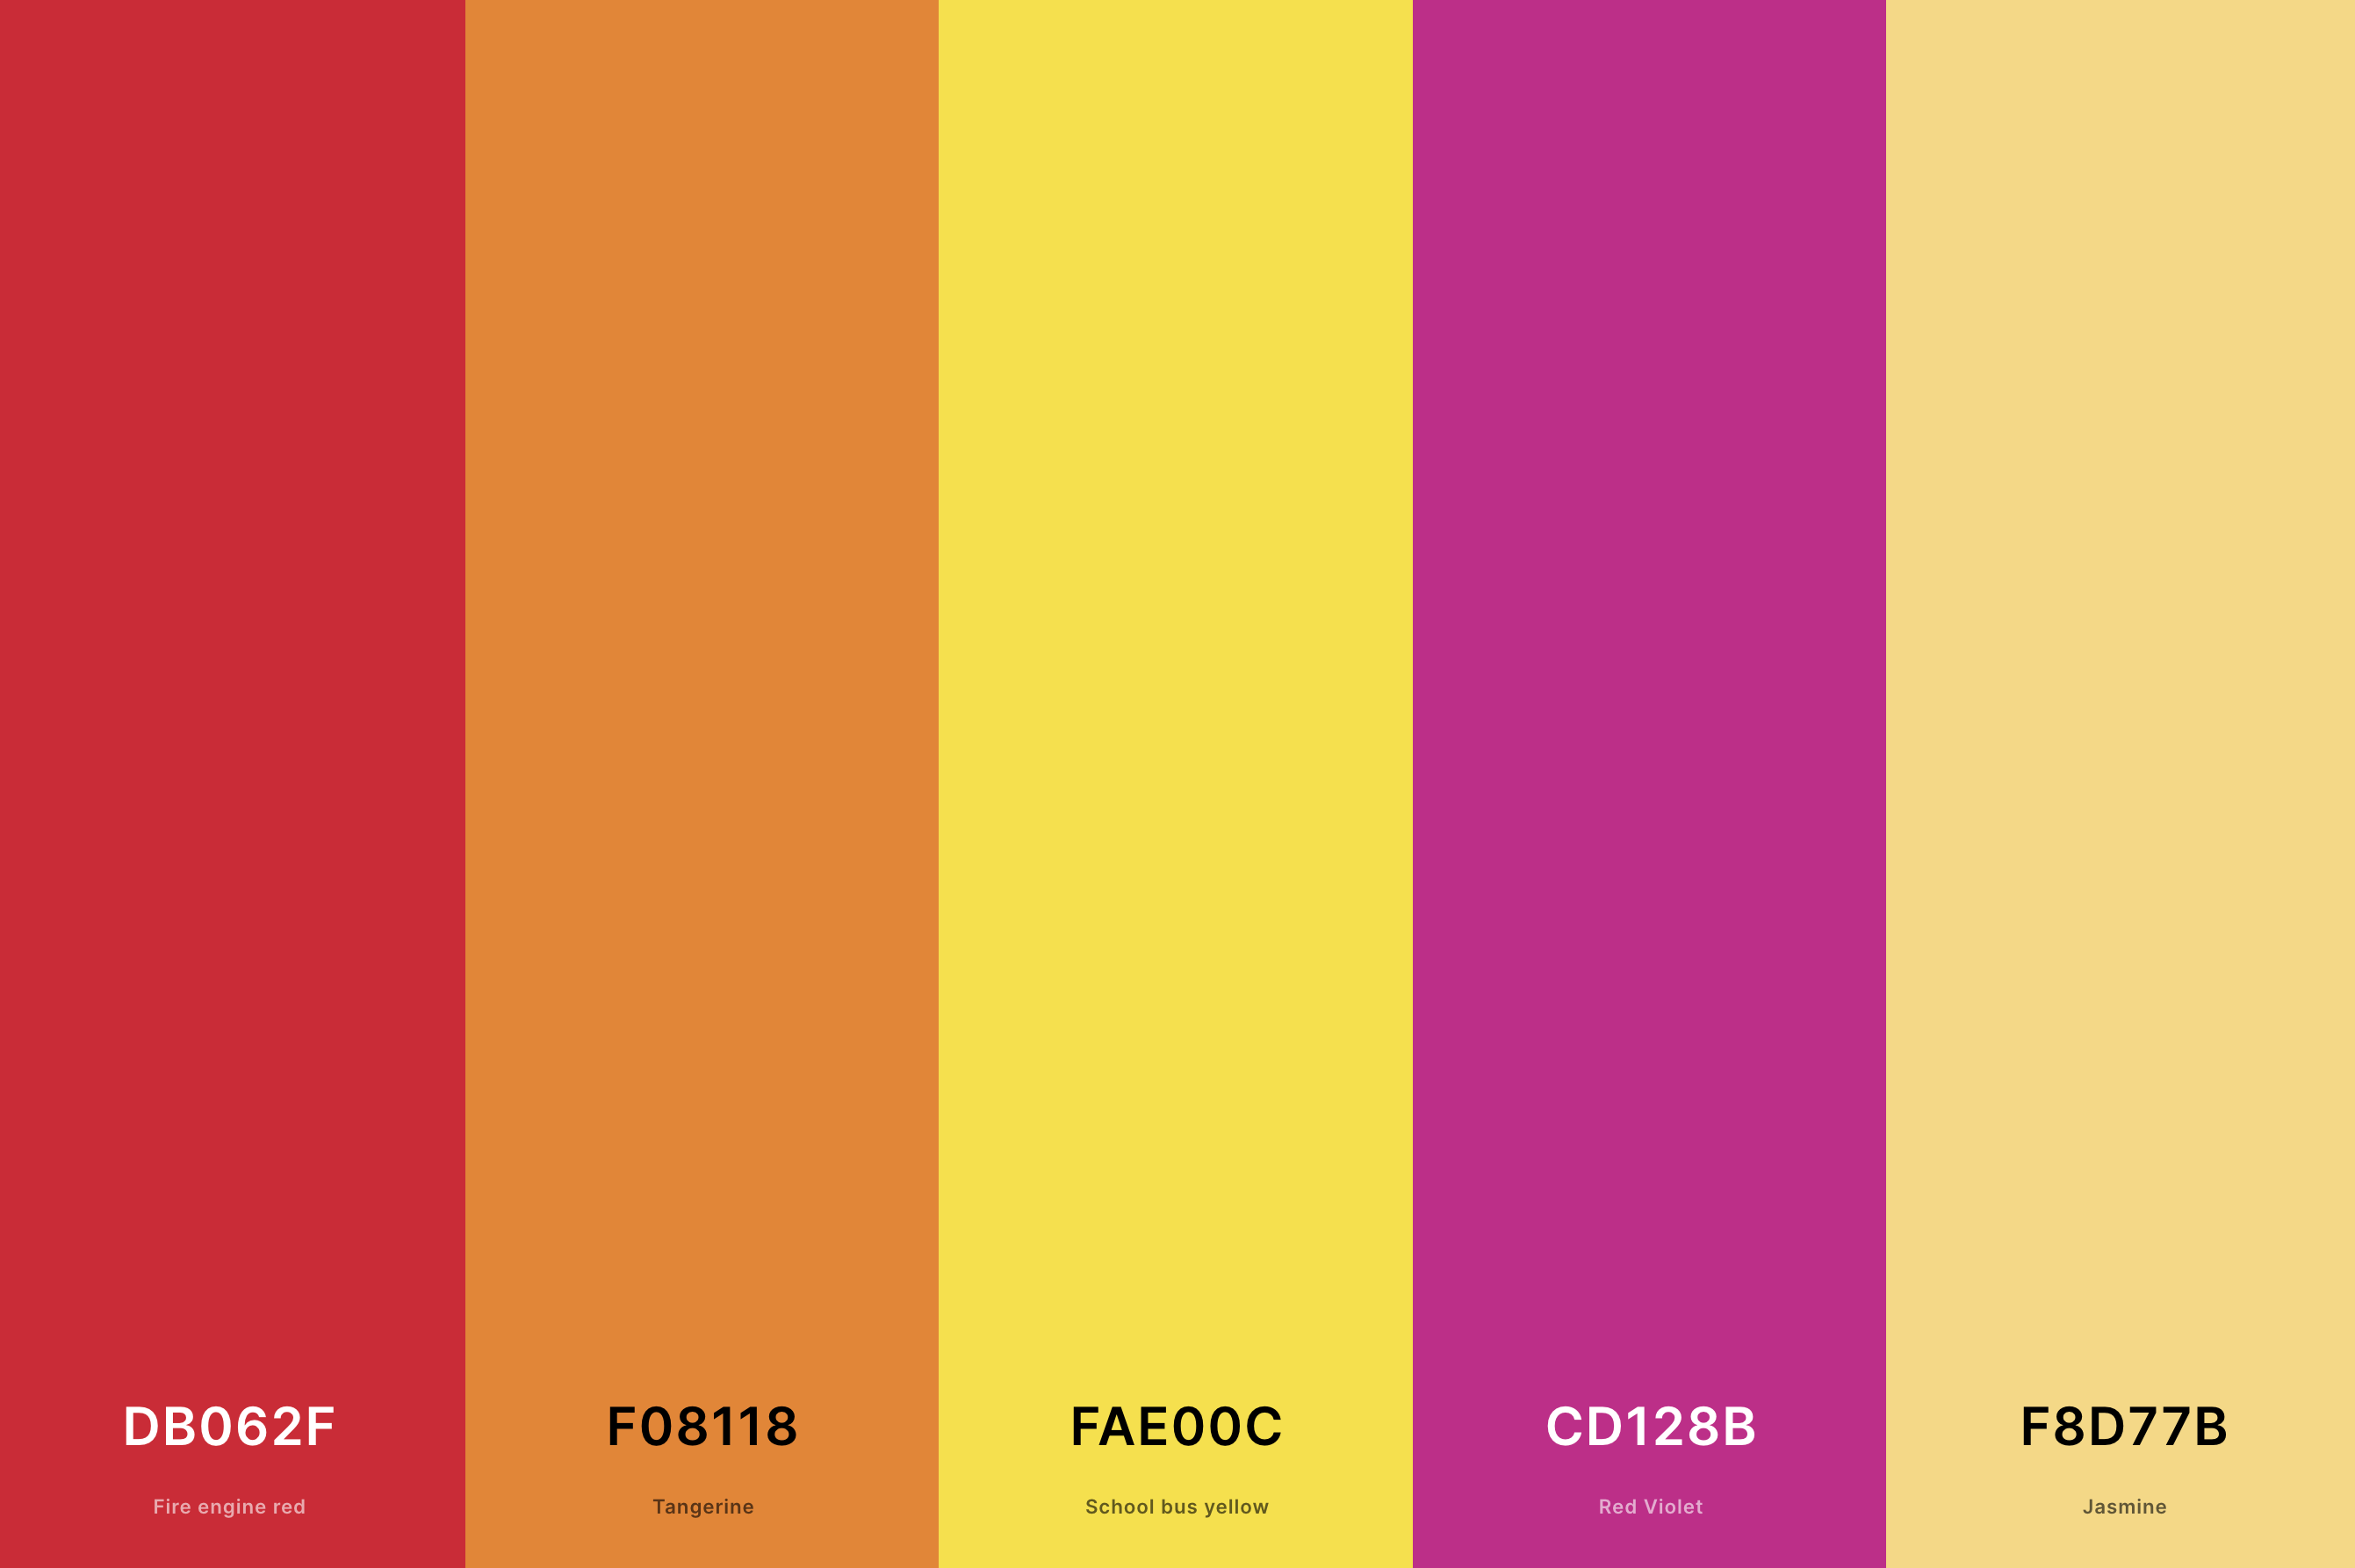 20. Sunset Shimmer Color Palette Color Palette with Fire Engine Red (Hex #DB062F) + Tangerine (Hex #F08118) + School Bus Yellow (Hex #FAE00C) + Red Violet (Hex #CD128B) + Jasmine (Hex #F8D77B) Color Palette with Hex Codes